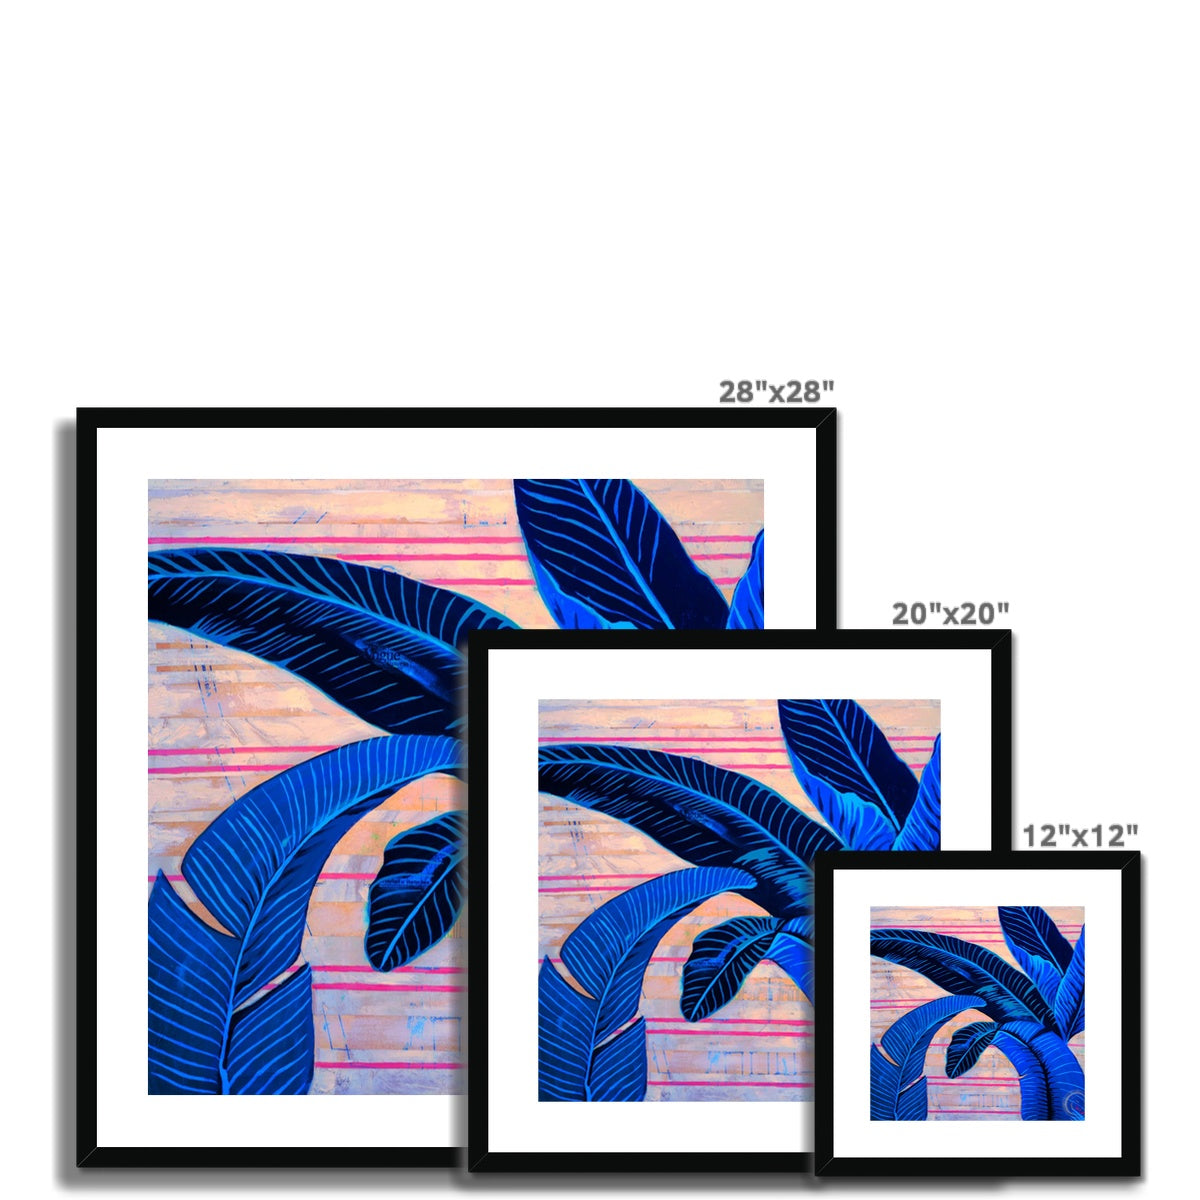 The BHH in Electric Blue Framed & Mounted Print